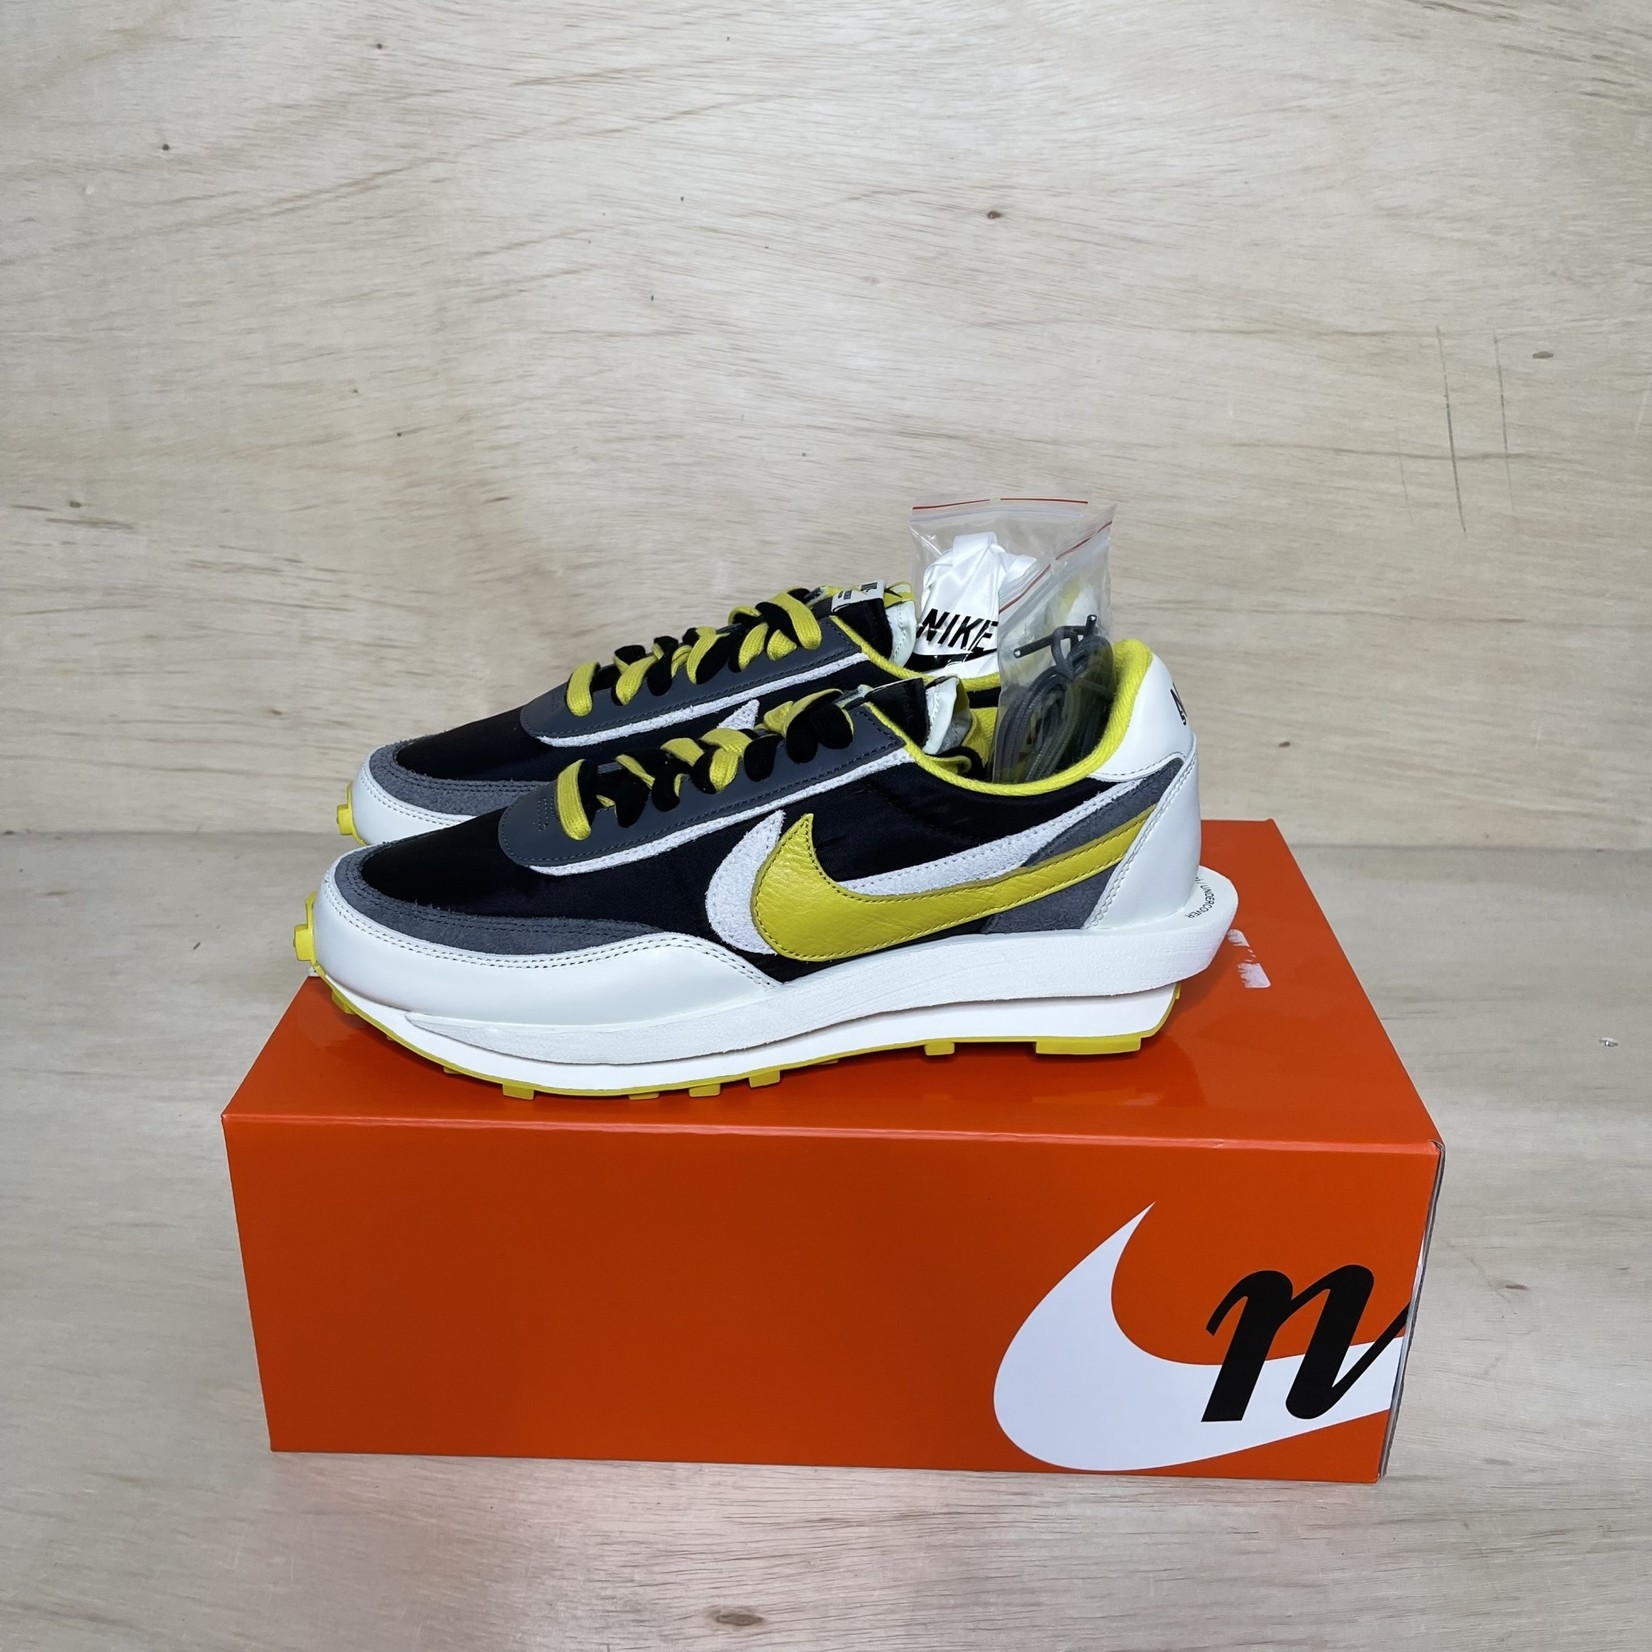 Nike Nike Sacai x Undercover Bright Citron Size 11, DS BRAND NEW